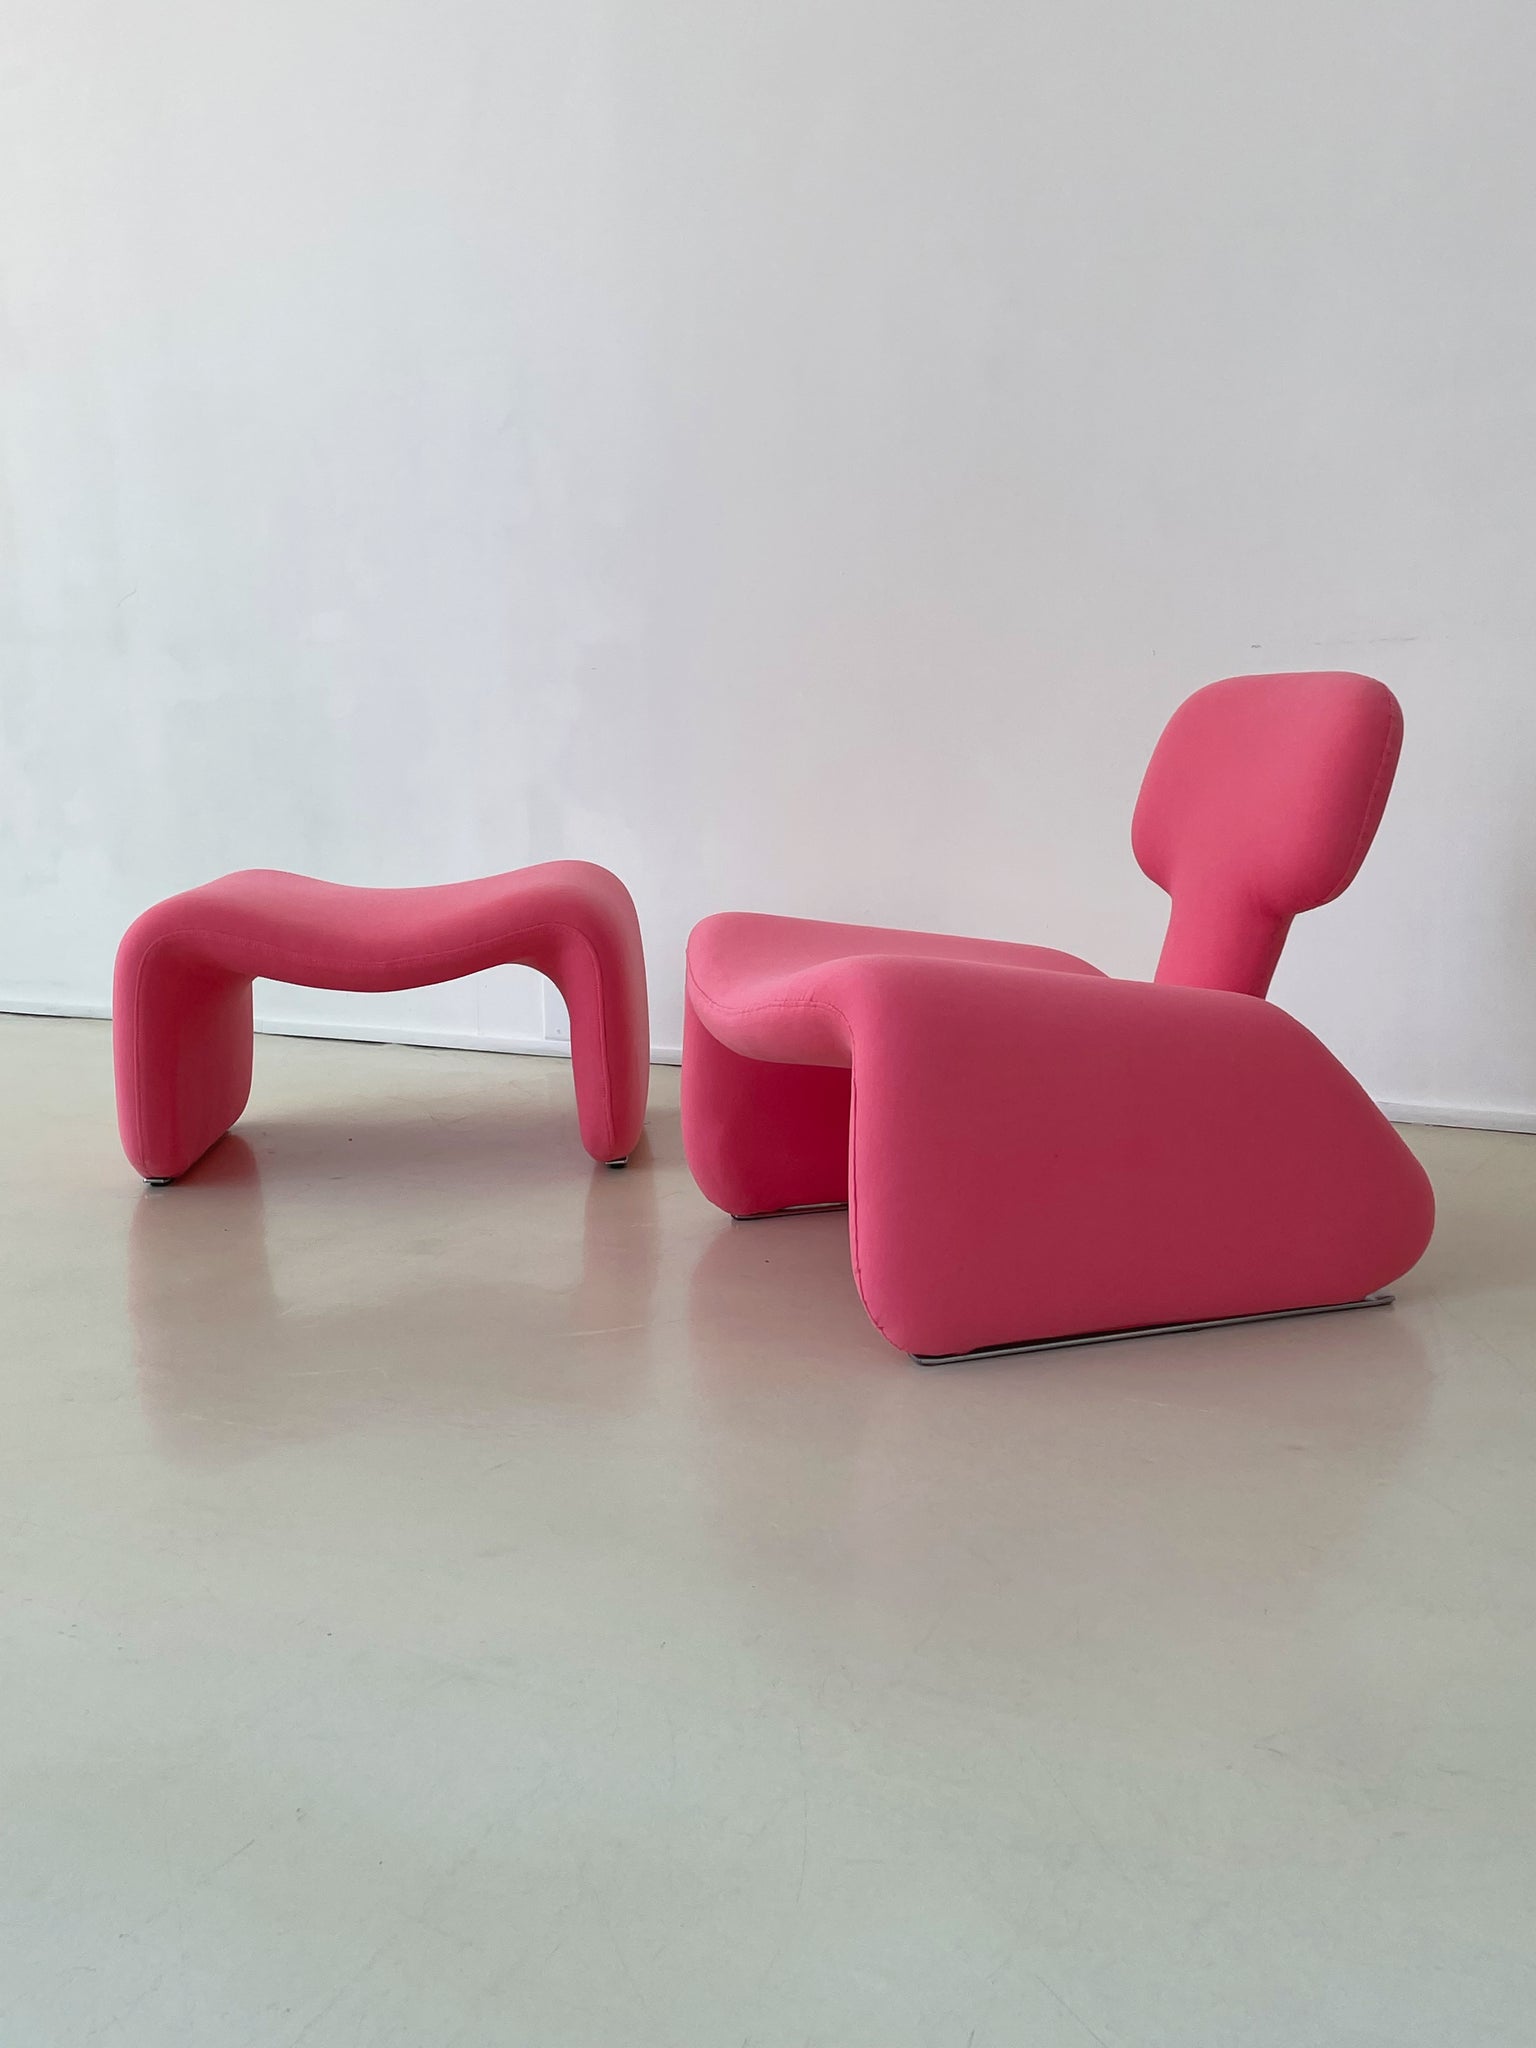 1960s Pink Olivier Mourgue For Airborne Djinn Chair + Ottoman